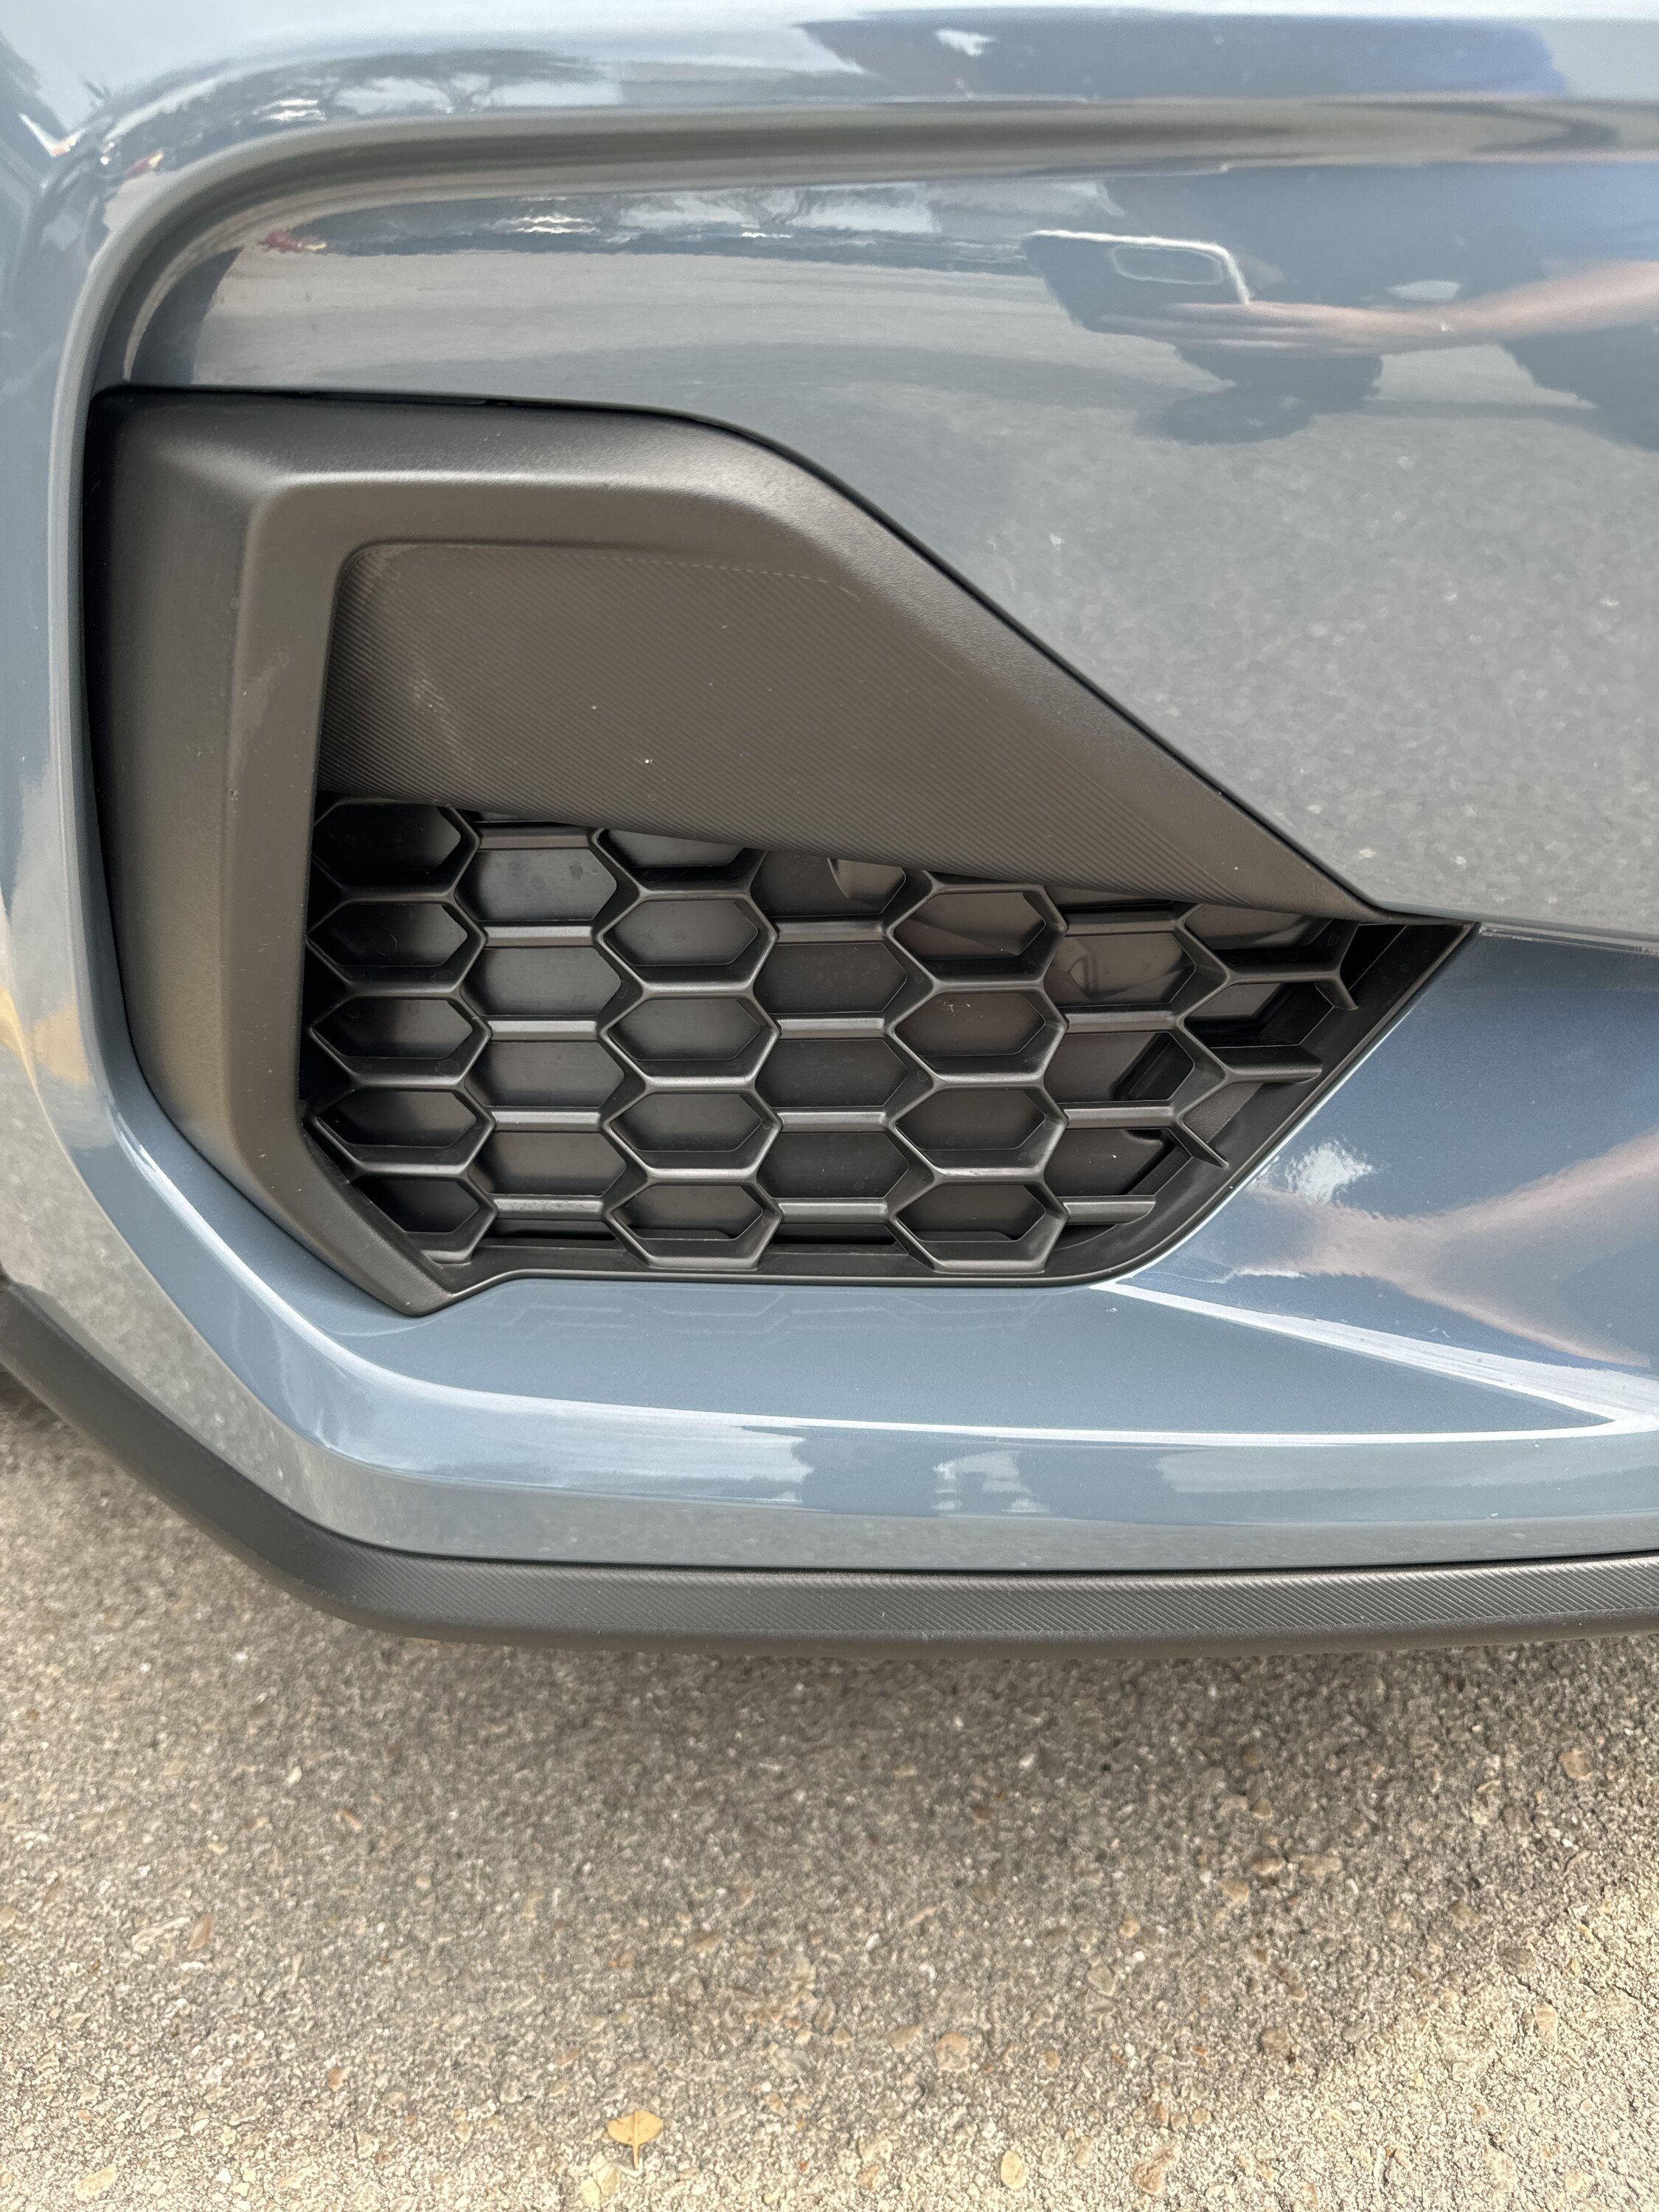 S650 Mustang What happens if I remove these panels? image